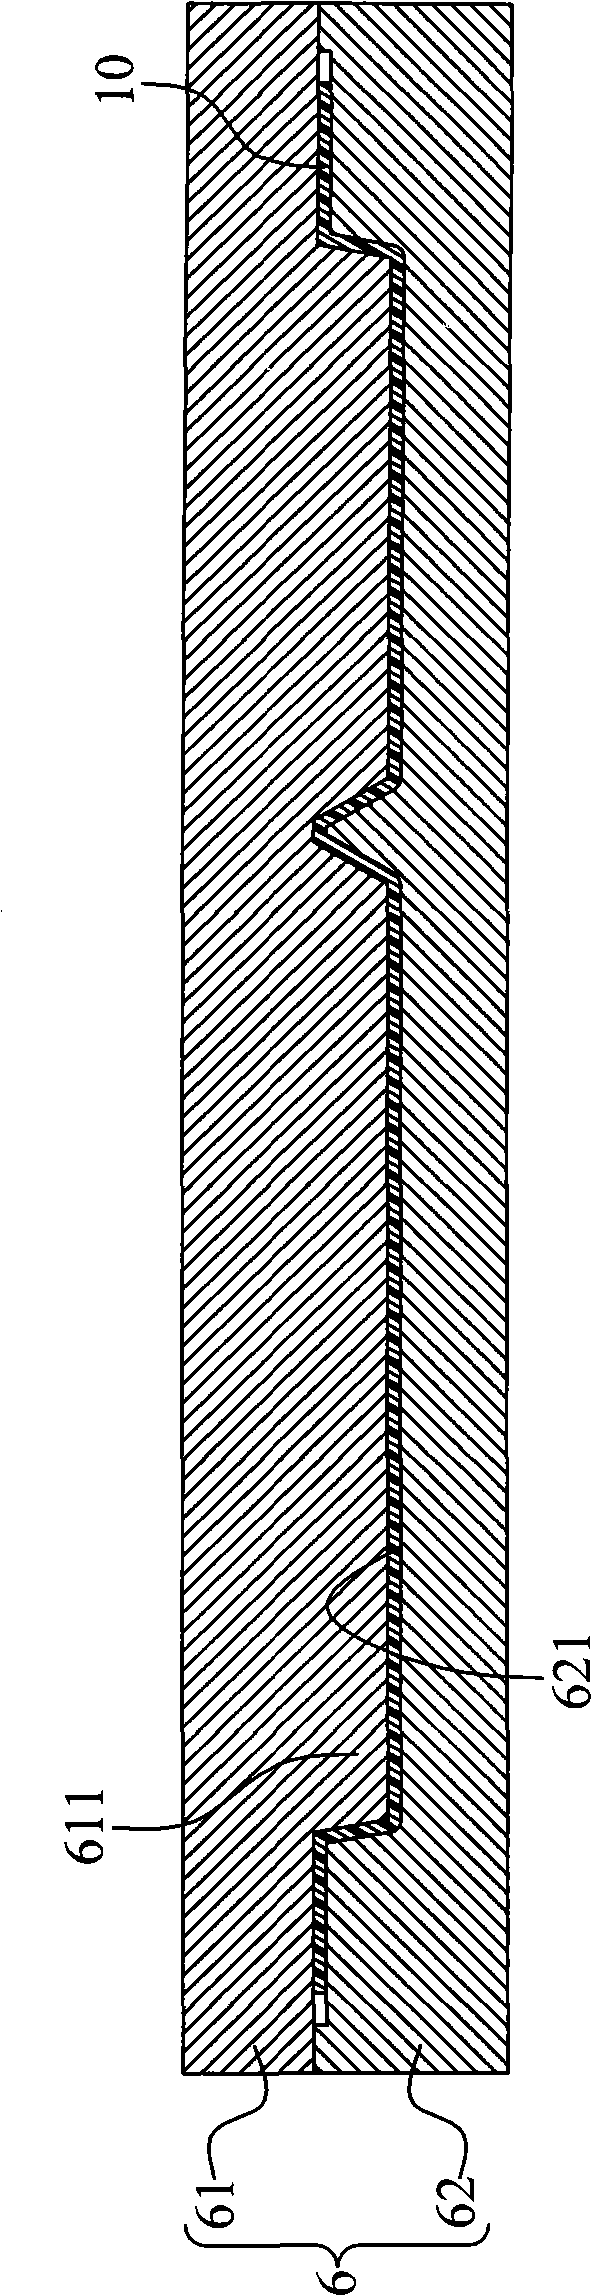 Protection cover manufacturing method capable of preventing electromagnetic wave interference